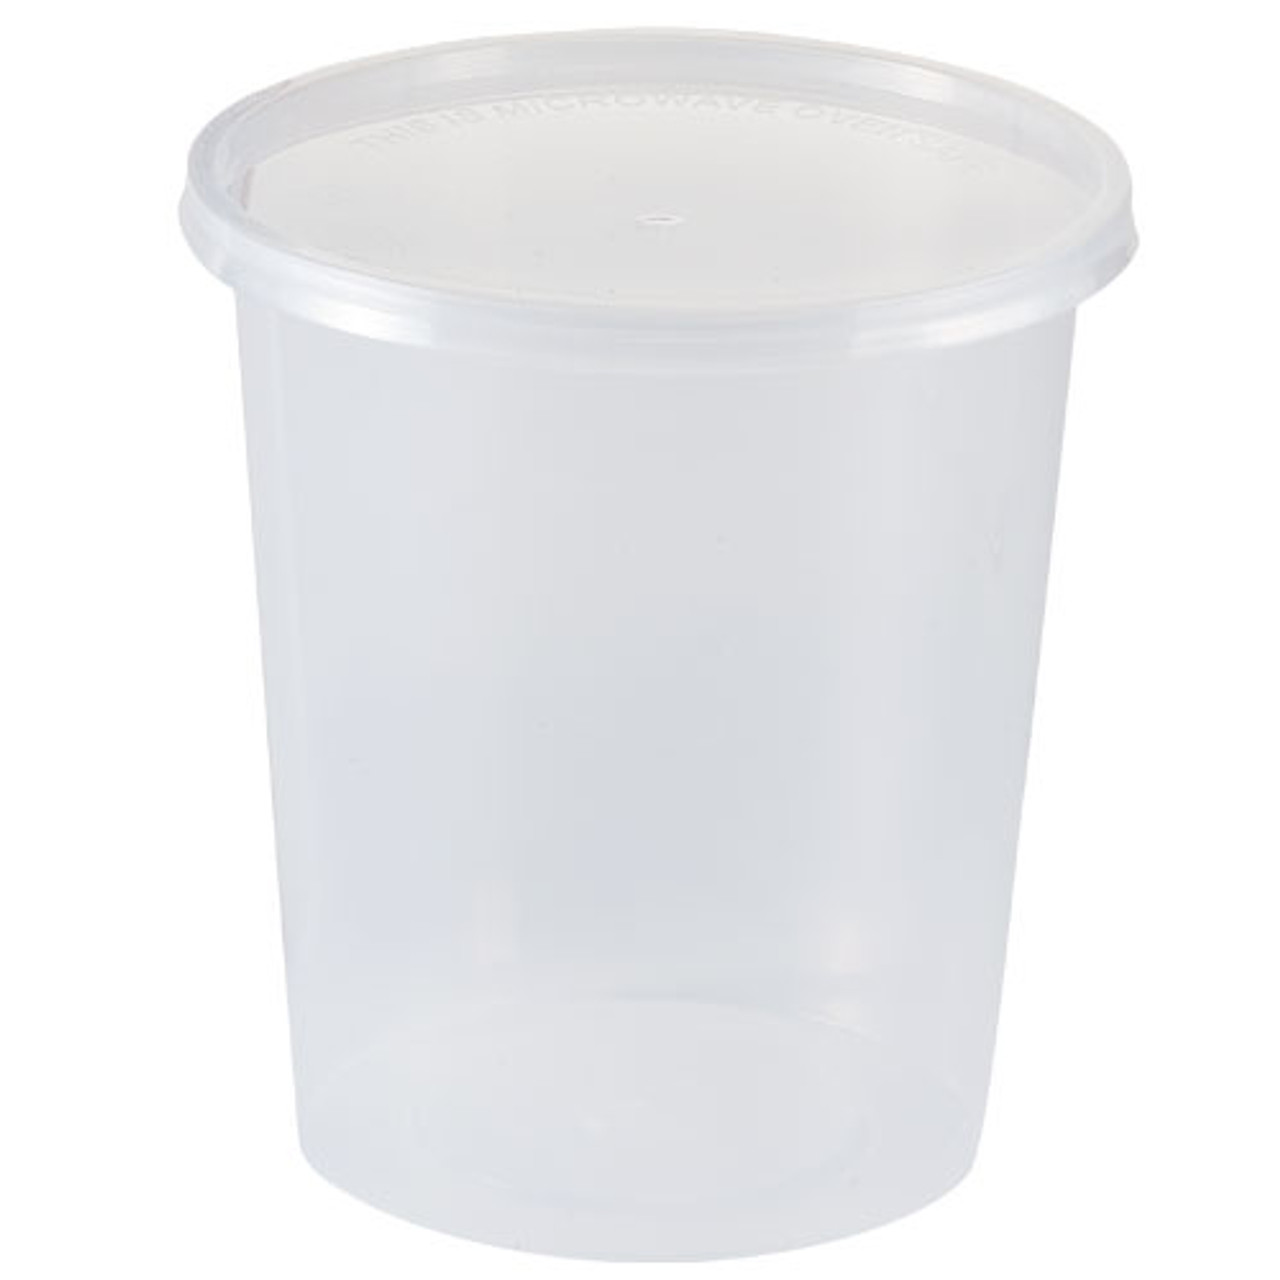 https://cdn11.bigcommerce.com/s-hgqmwywp99/images/stencil/1280x1280/products/49057/43848/32oz-clear-plastic-disposable-containers-w-lids-case-of-240-3__50564.1675880307.jpg?c=1?imbypass=on